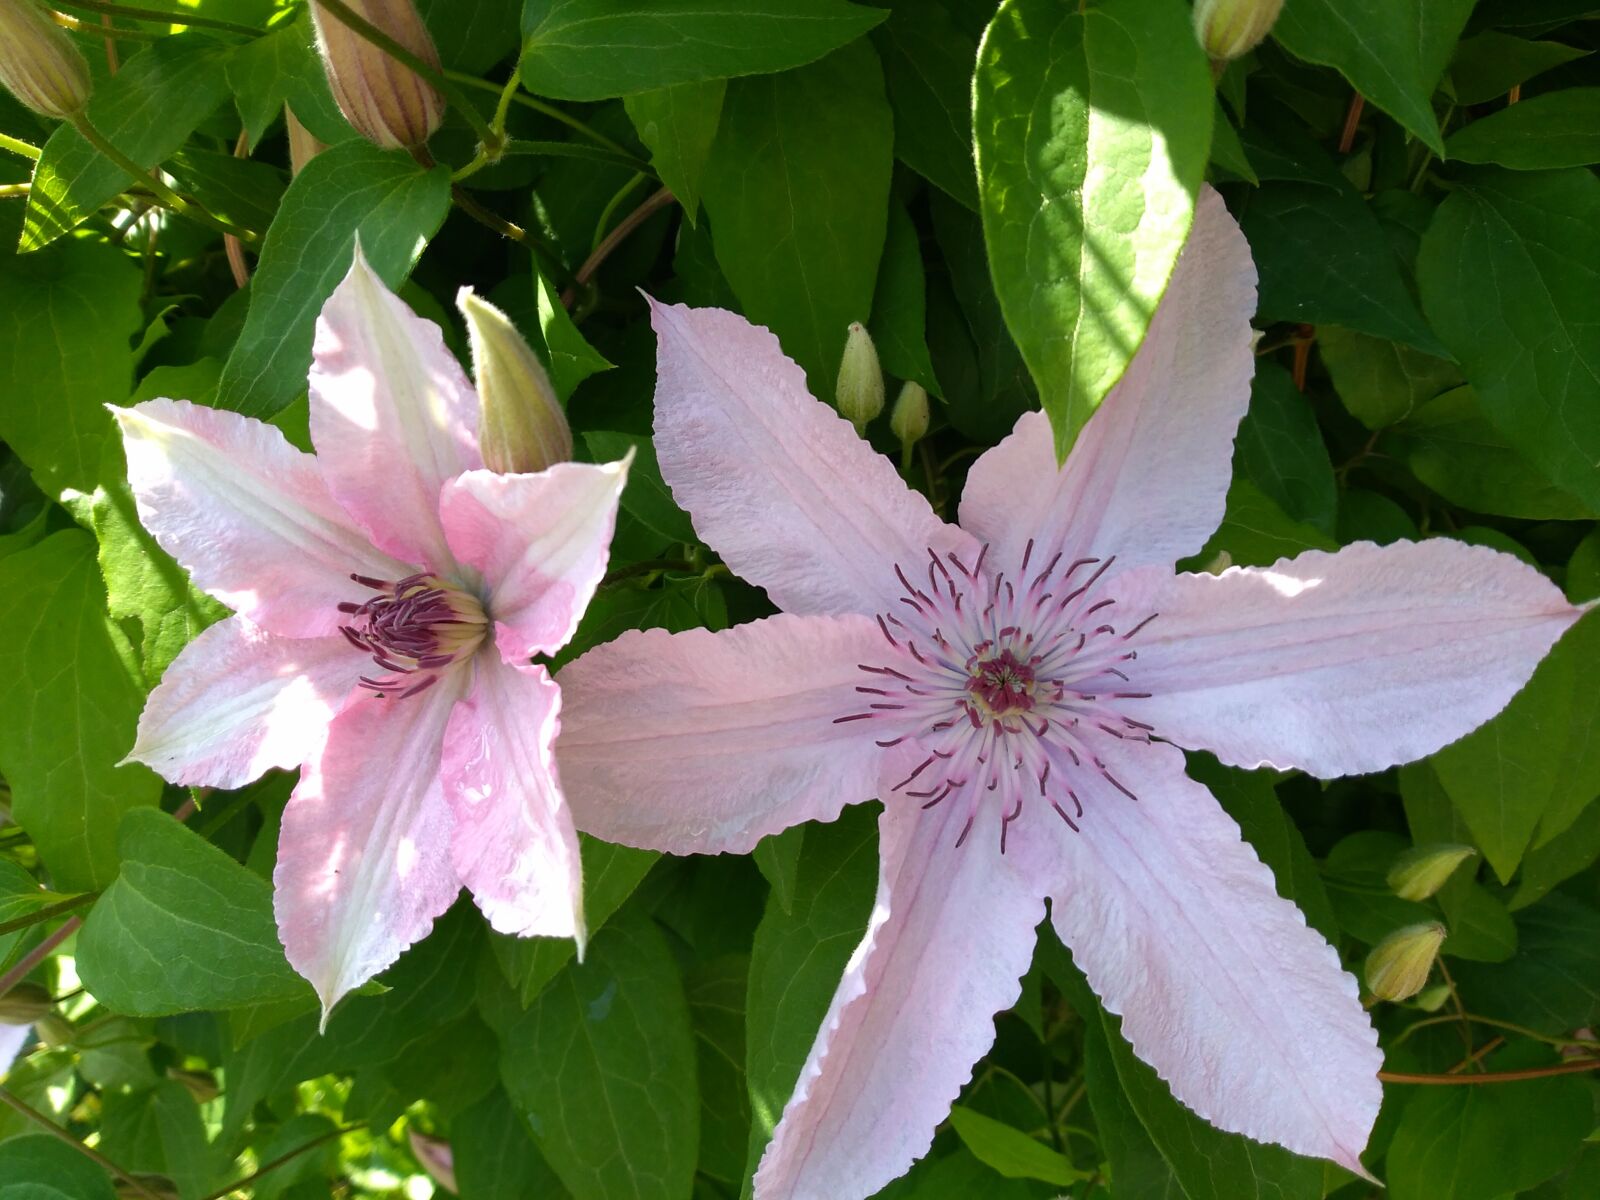 HUAWEI P9 LITE MINI sample photo. Clematis, pink, flower photography